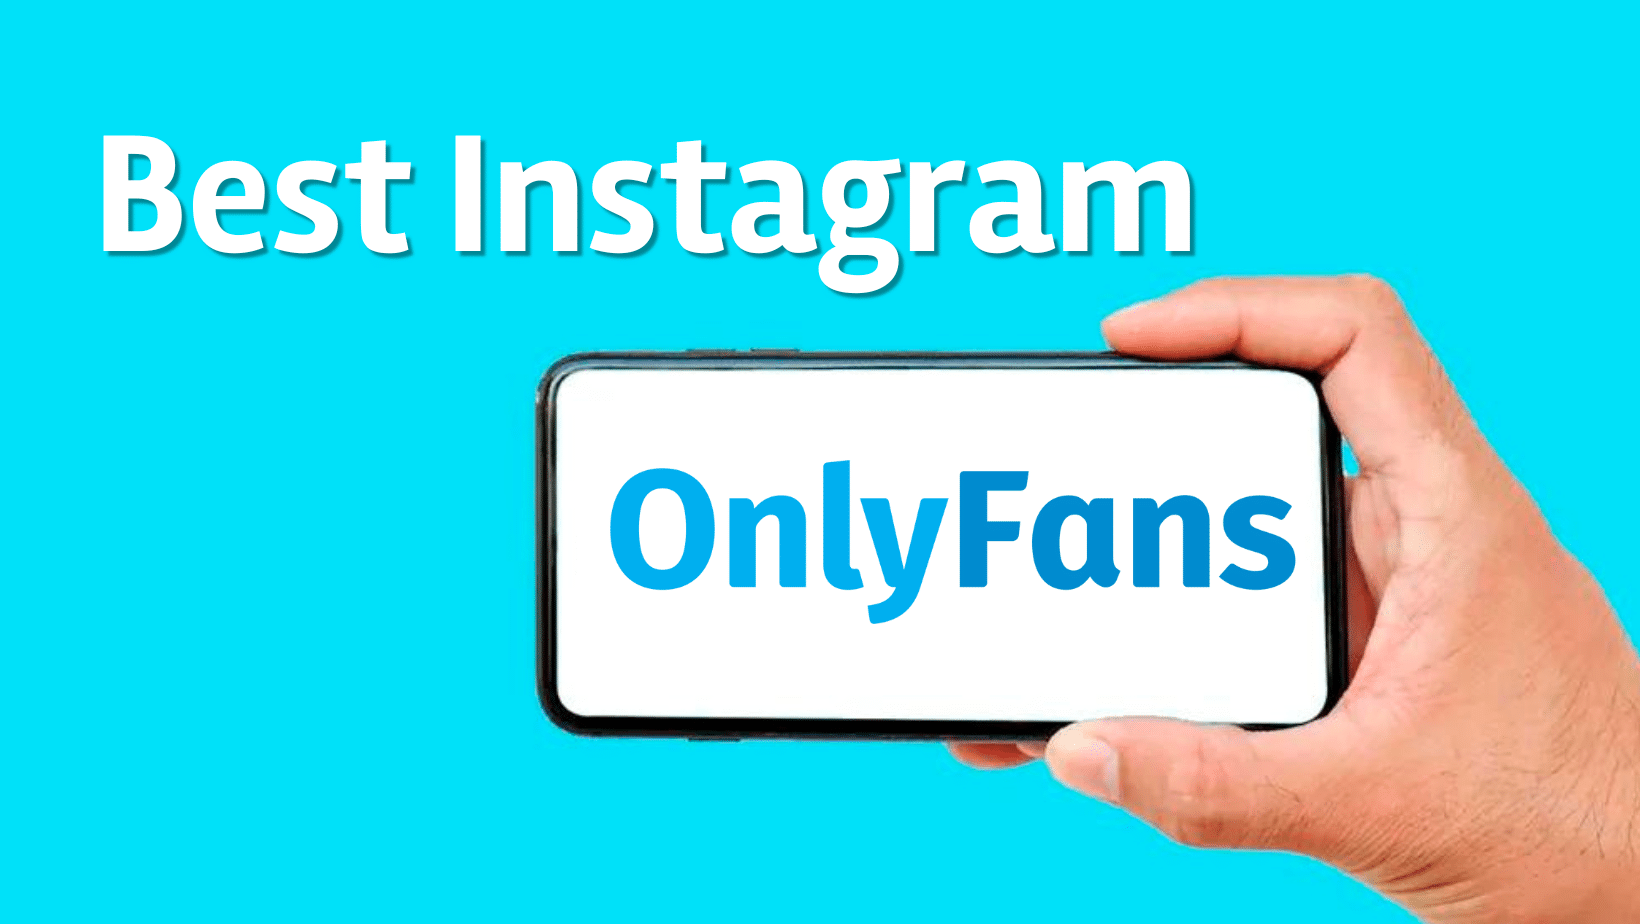 Top 13 Instagram Influencers with Onlyfans